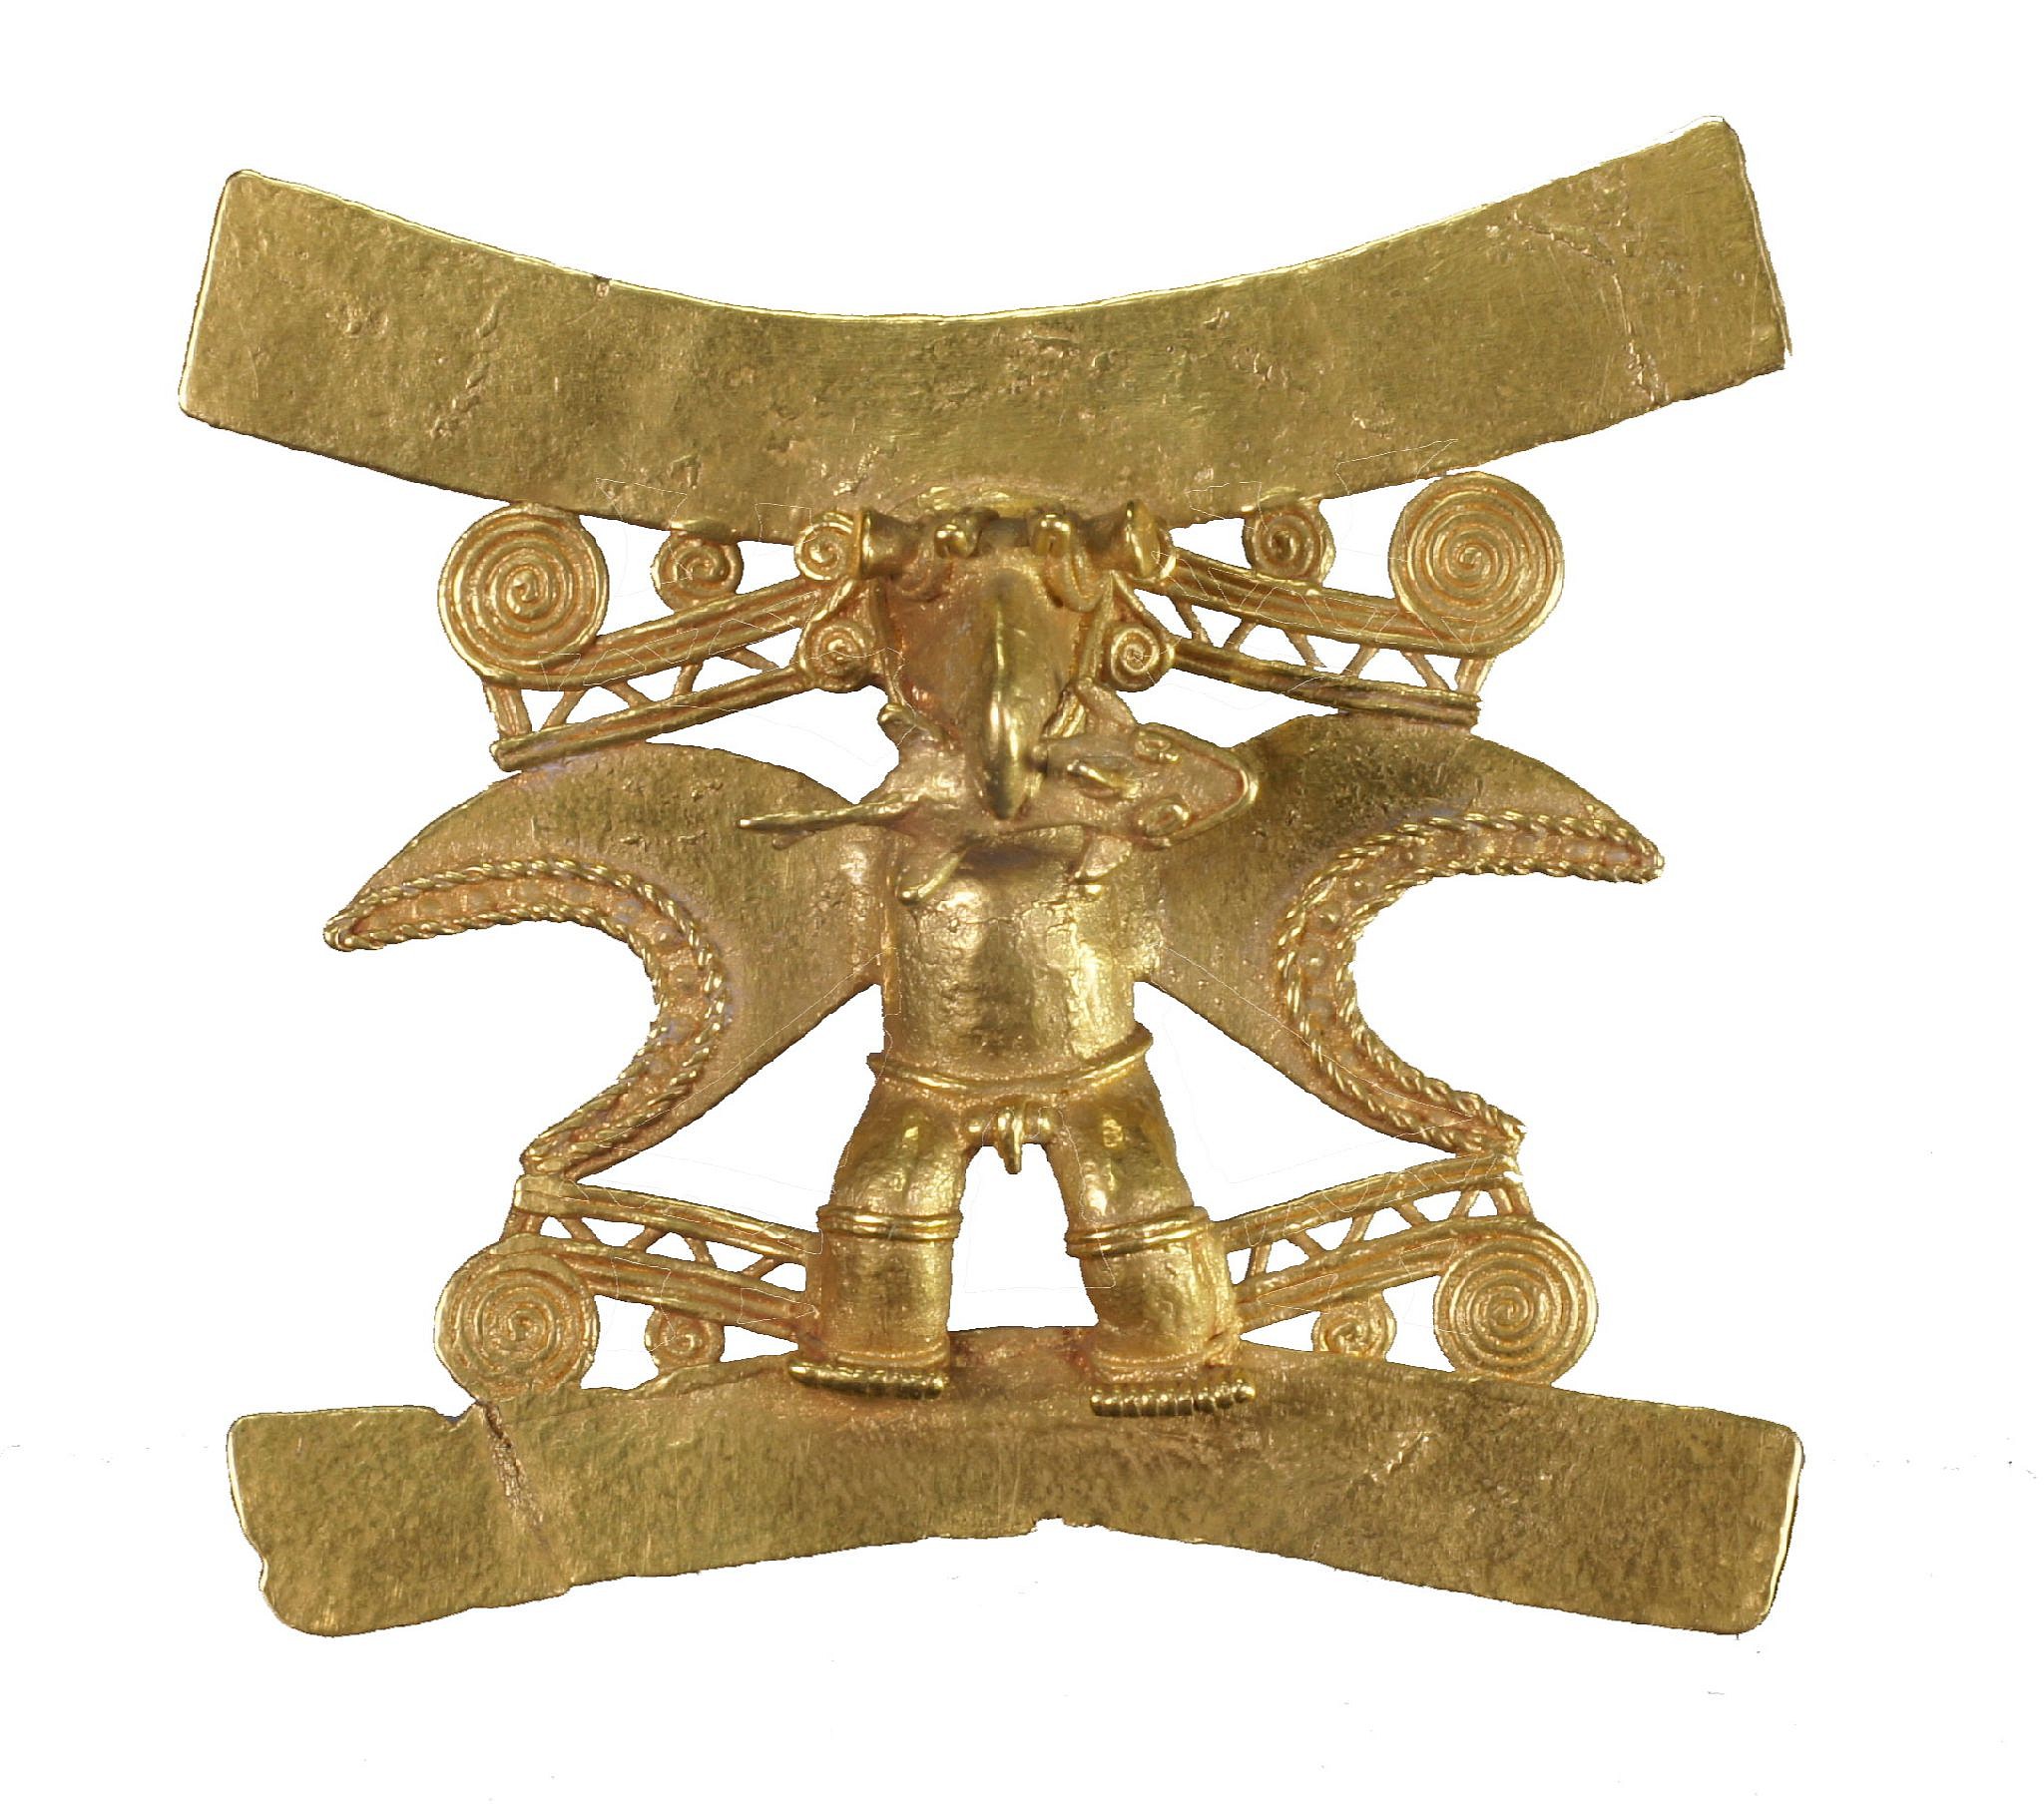 Panama, Diquis Gold Figural Pendant Wearing a Raptor Bird Mask
The pendant is an excellent example of the Lost Wax casting technique.  The imposing figure has typical Diquis style "C"-shaped wings with crocodile heads emanating from behind the head and feet.   The figure is probably a male shaman in transition for flight to the other world.  This pendant is illustrated in THE ART OF PRECOLUMBIAN GOLD- The Jan Mitchell Collection, pg. 105,  and also in POWER OF GOLD, p. 72.  Another similar example of a Diquis pendant with with a bat's head is illustrated in Between the Continents/Between Seas: PRECOLUMBIAN ART OF COSTA RICA, plate 93. Another very similar piece is in the Denver Art Museum.  Ex. New York collector, prior to 1970.
Media: Metal
Dimensions: Height: 31/4" x Width: 31/2"   Weight: 97gramsXRF: Au. 90.6%, Ag.6.3%, Cu. 2.8% Pt. Platimum 1.03%
Price Upon Request
n7055